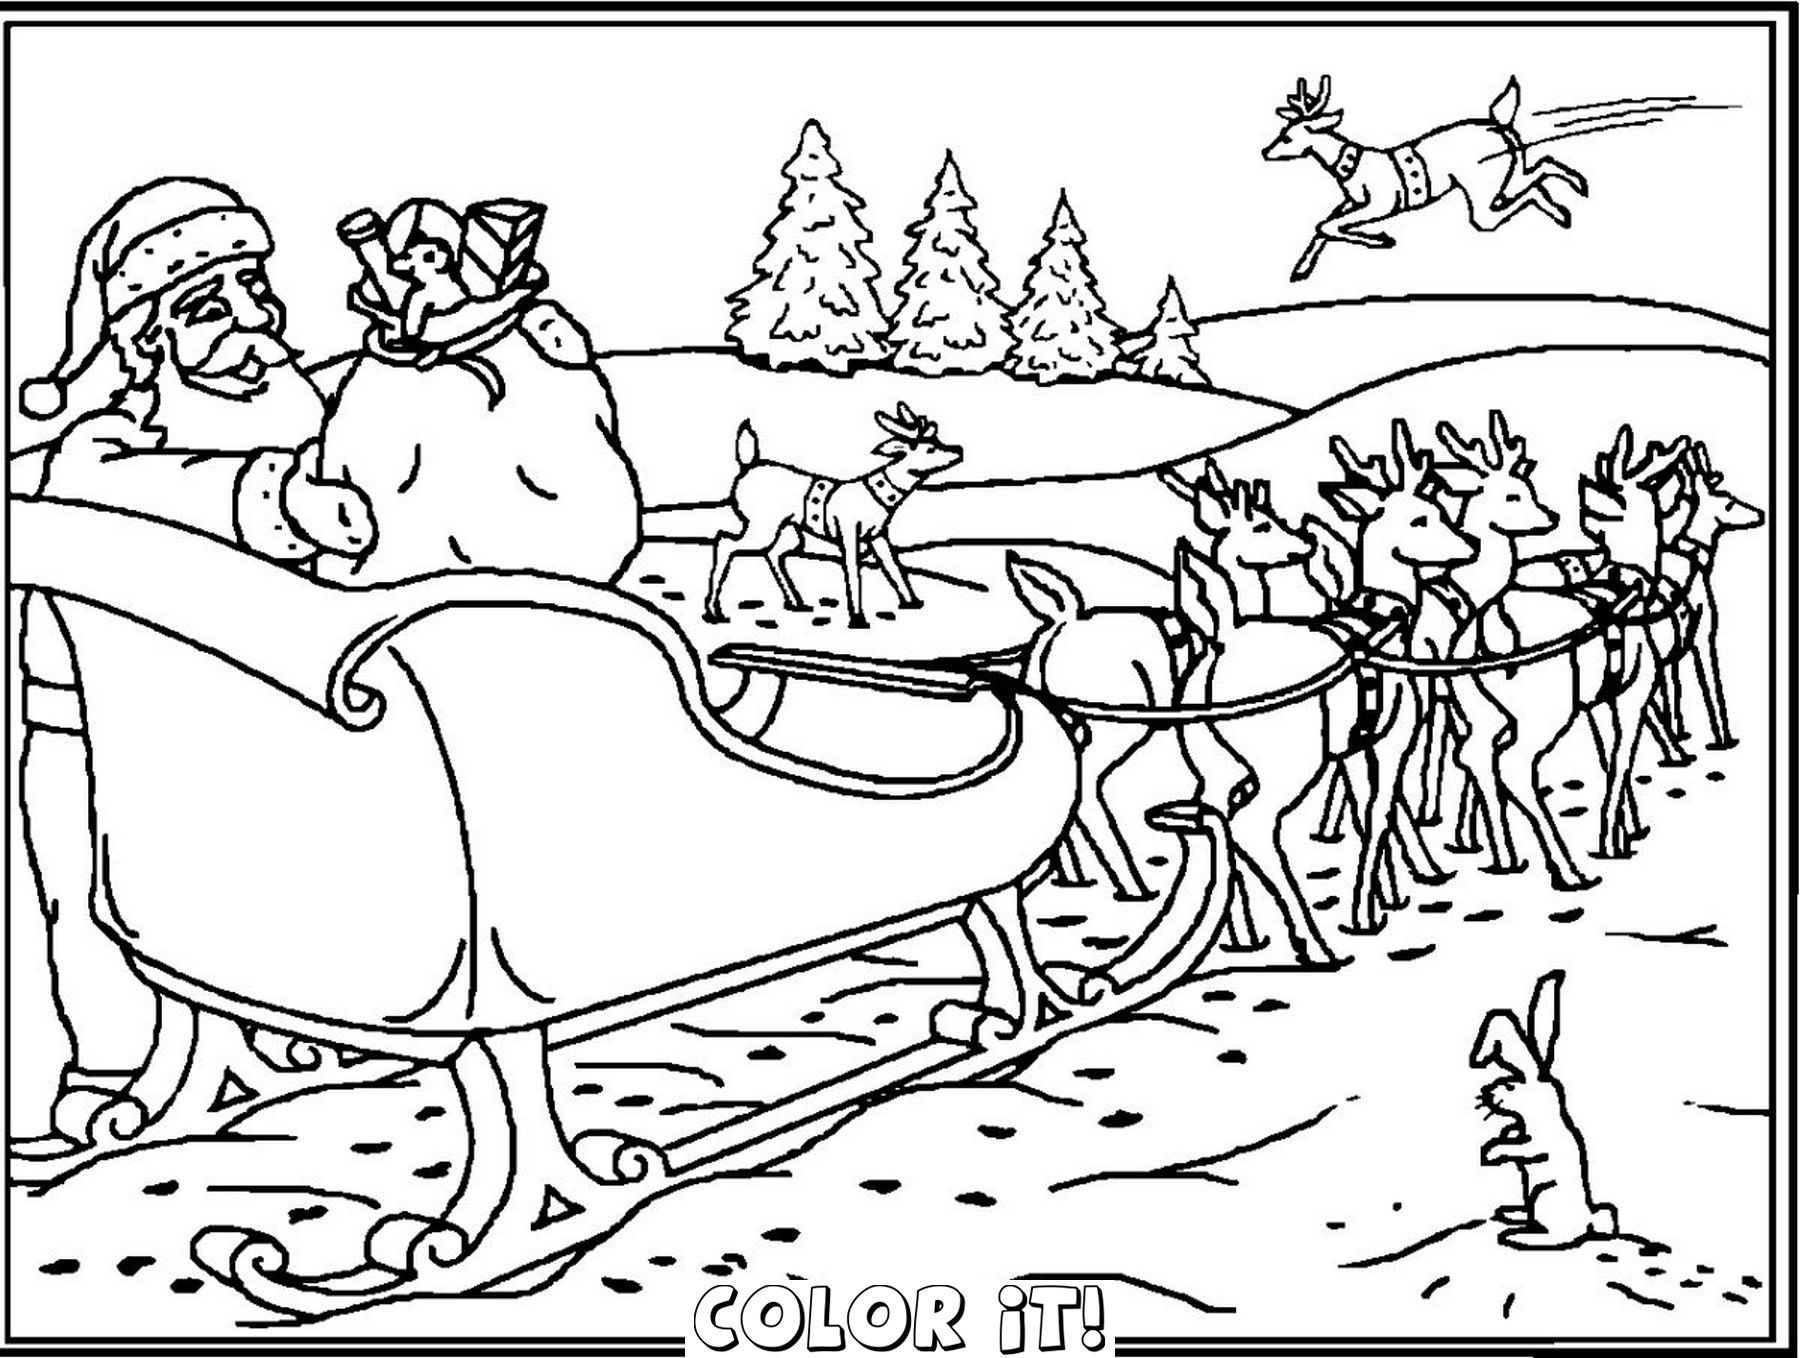 Free Coloring Pages - Free Coloring Pages